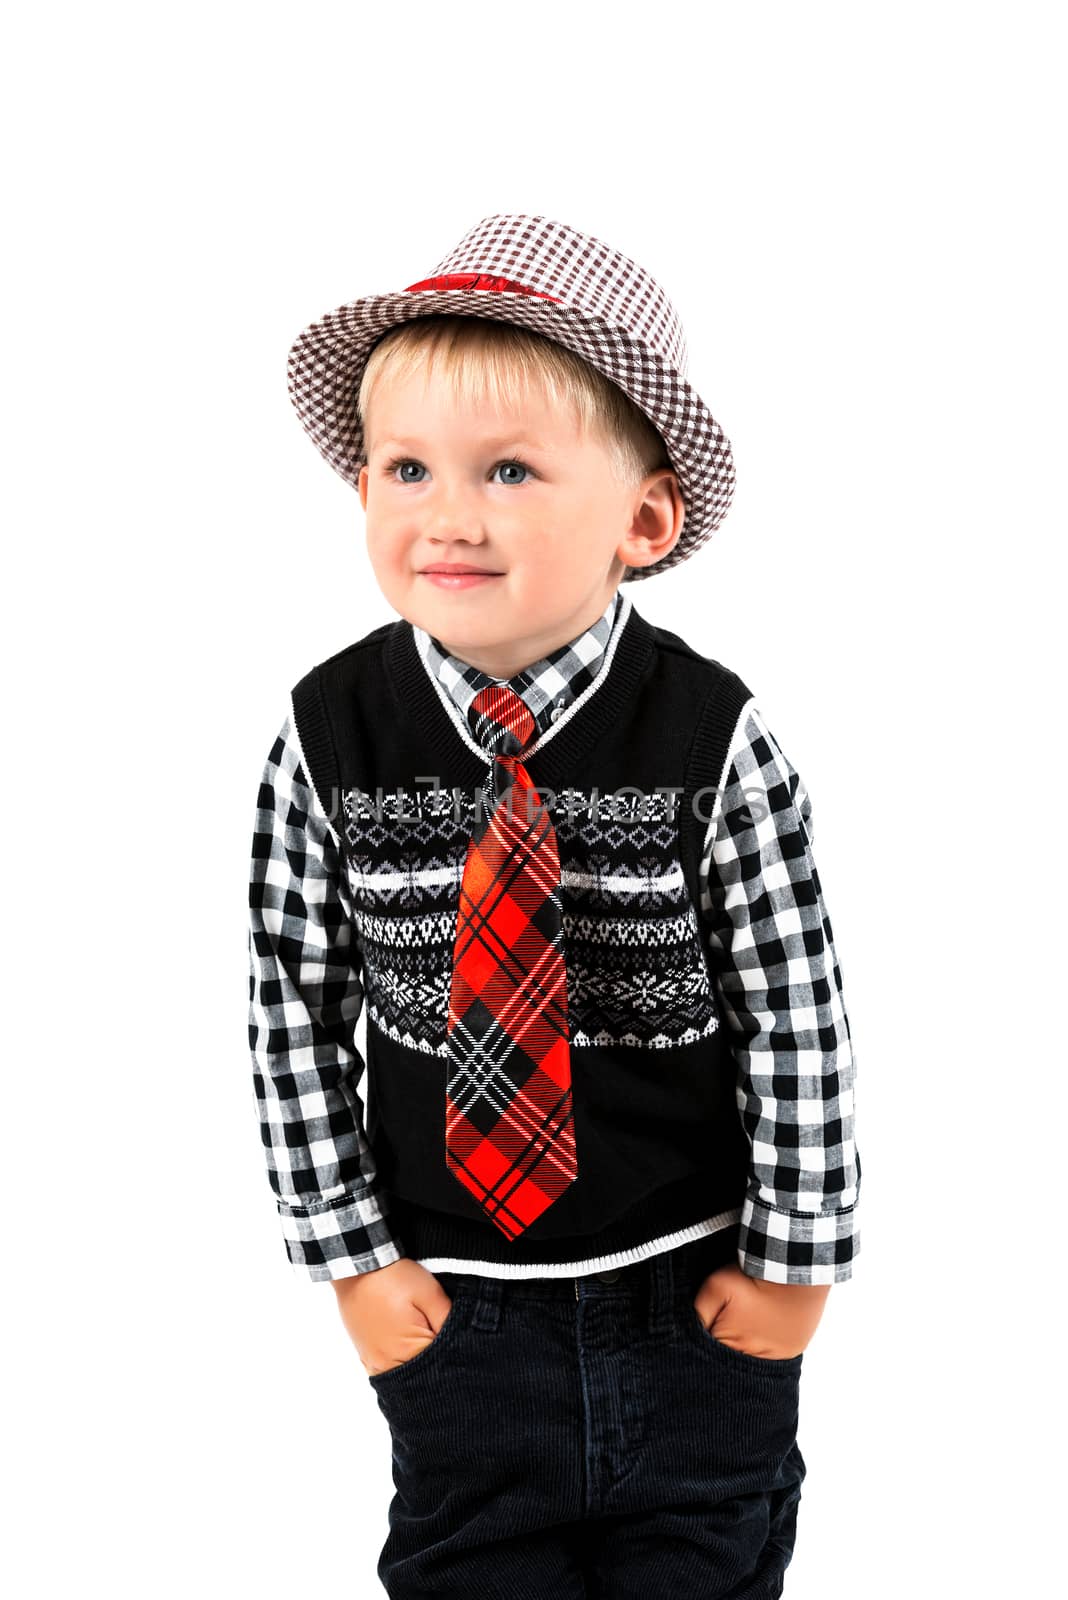 Smiling happy boy in hat and tie shot in the studio on a white background